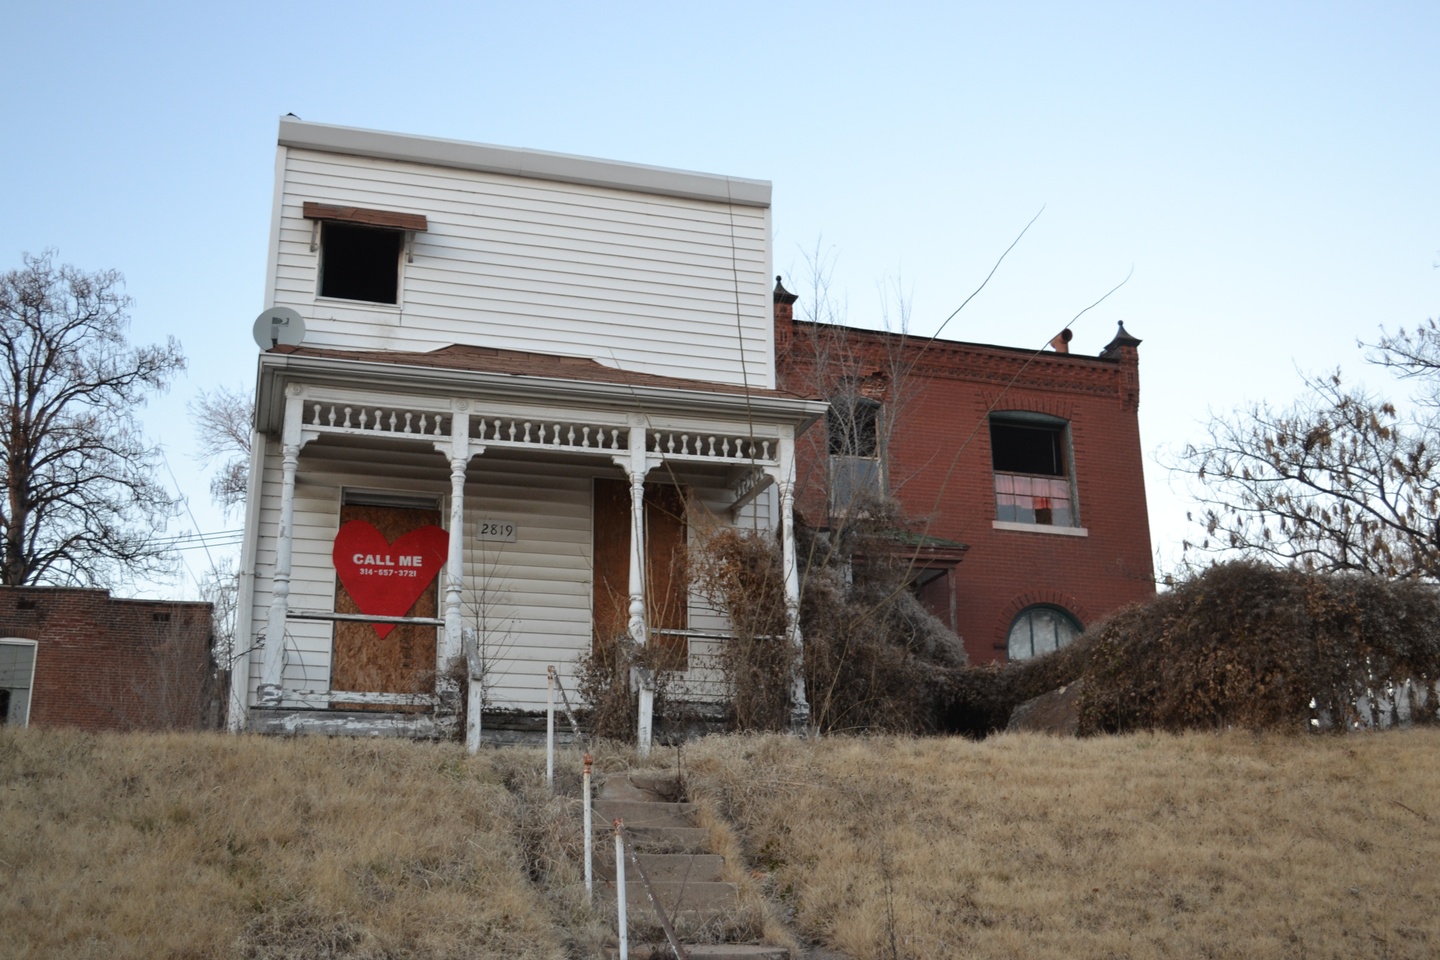 Abandoned house with a large red heart nailed over the boarded up door that reads "Call Me" with a phone number.